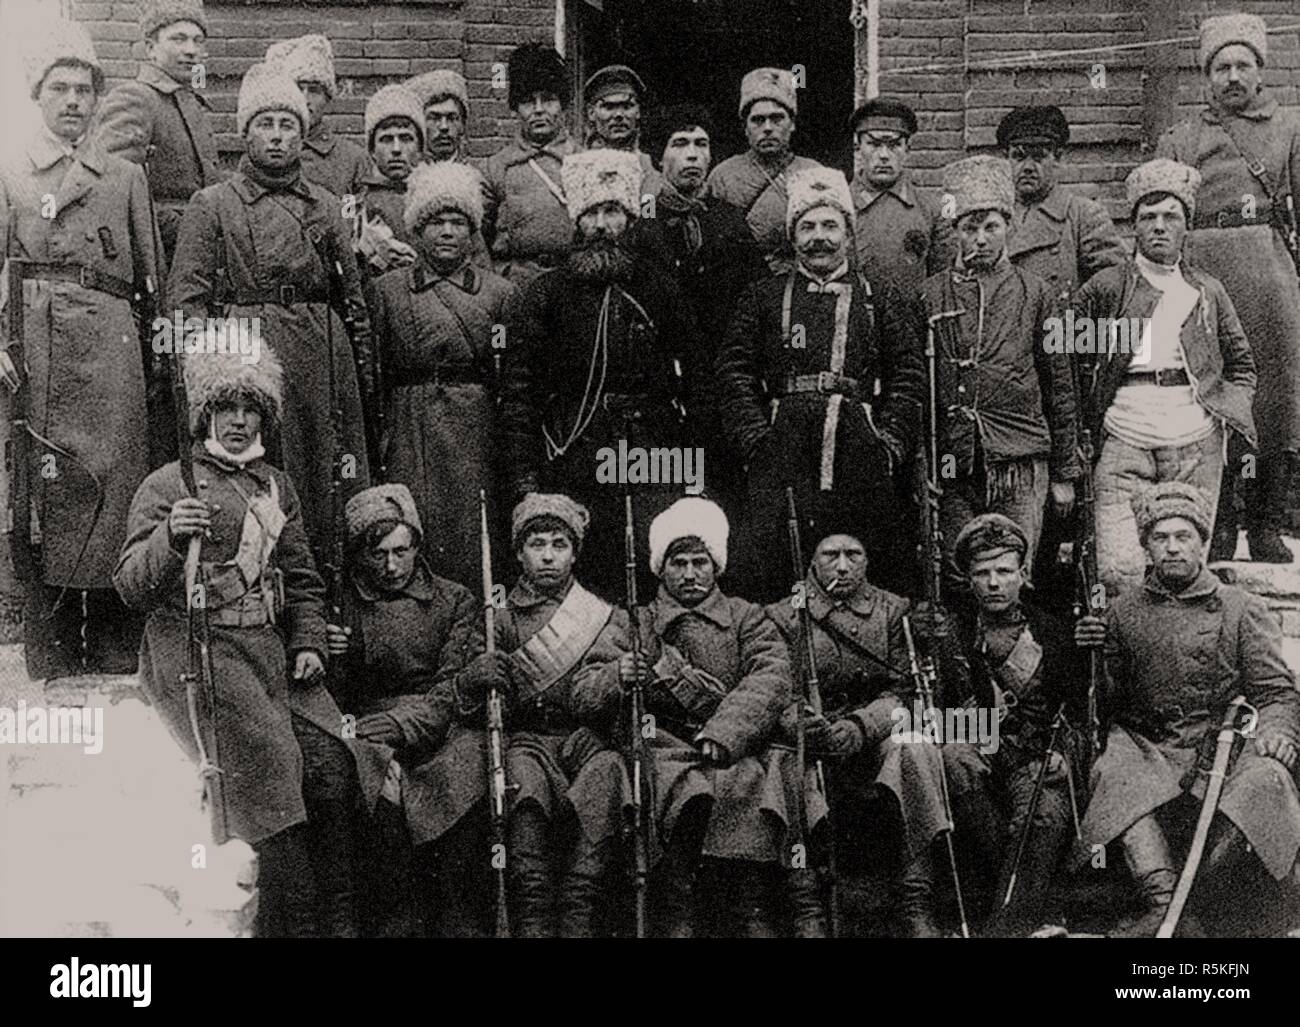 The Tambov rebel forces. Museum: Russian State Historical Library, Moscow. Author: ANONYMOUS. Stock Photo